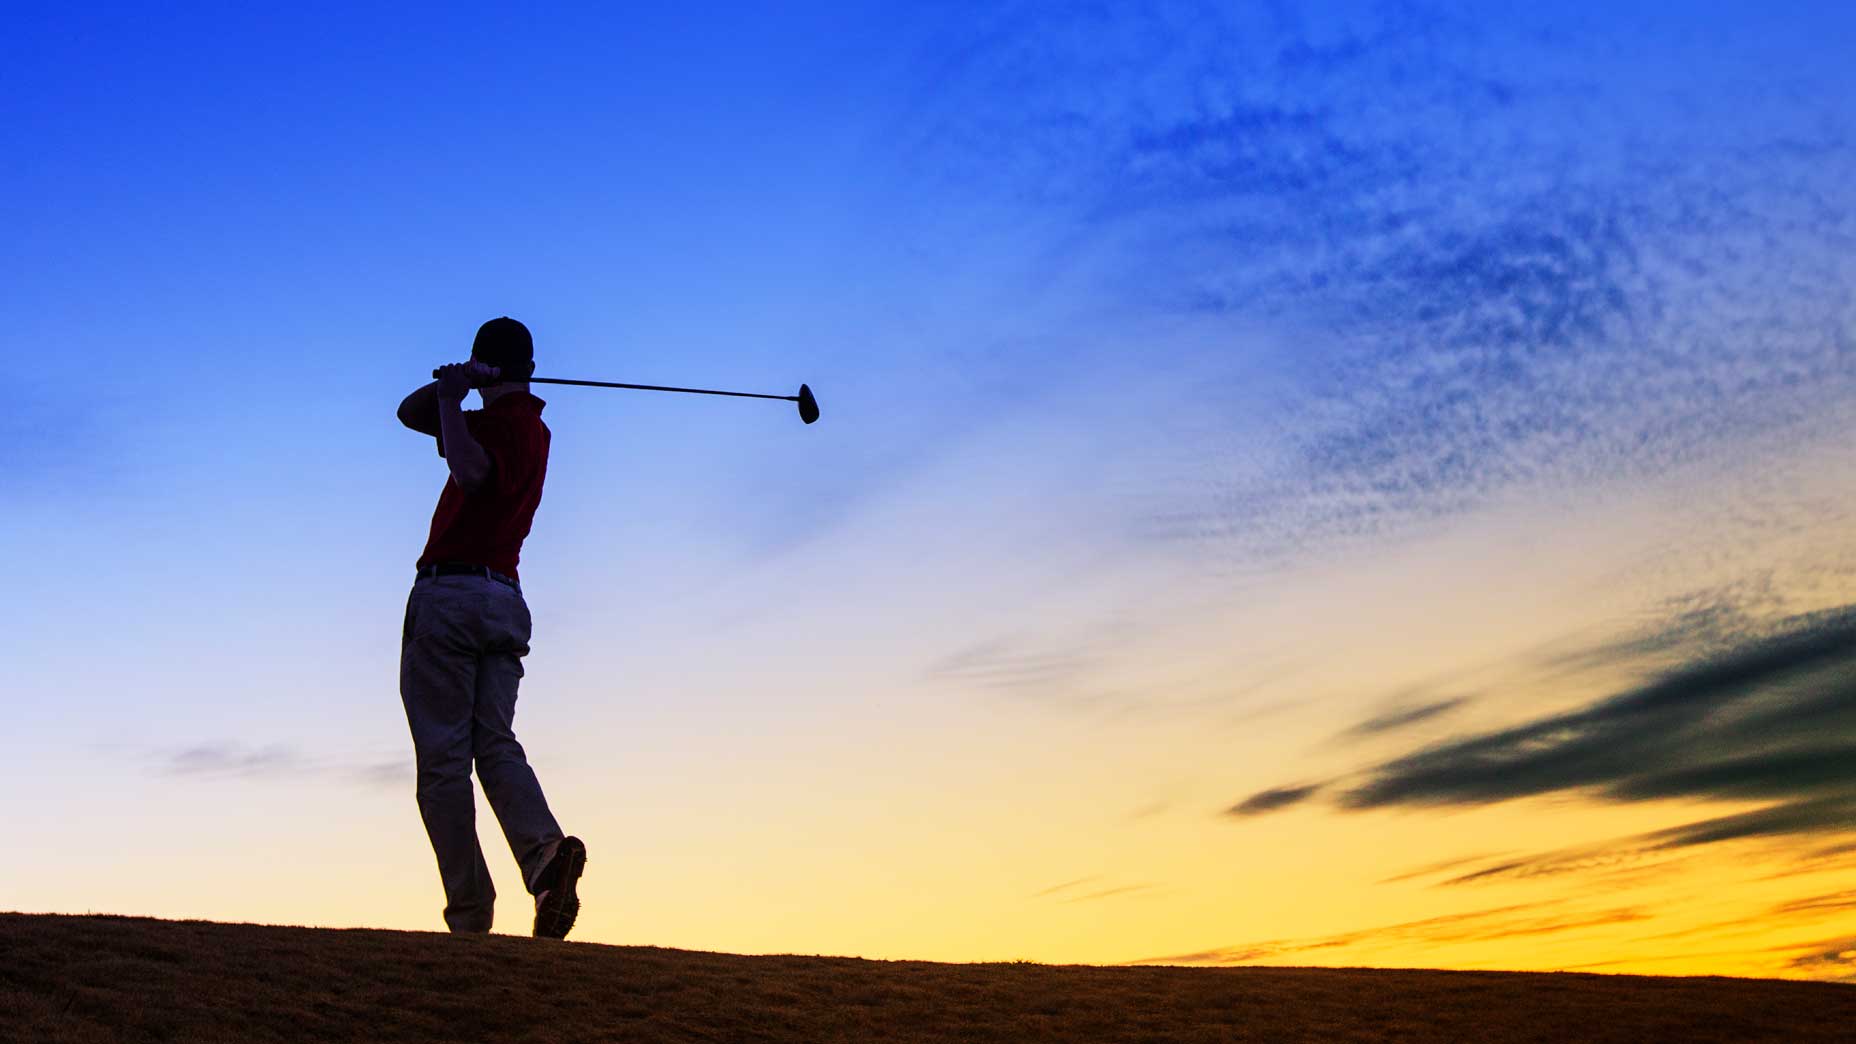 ‘If I wanted to date her, I had to golf with him’: Reader falling-for-golf moments